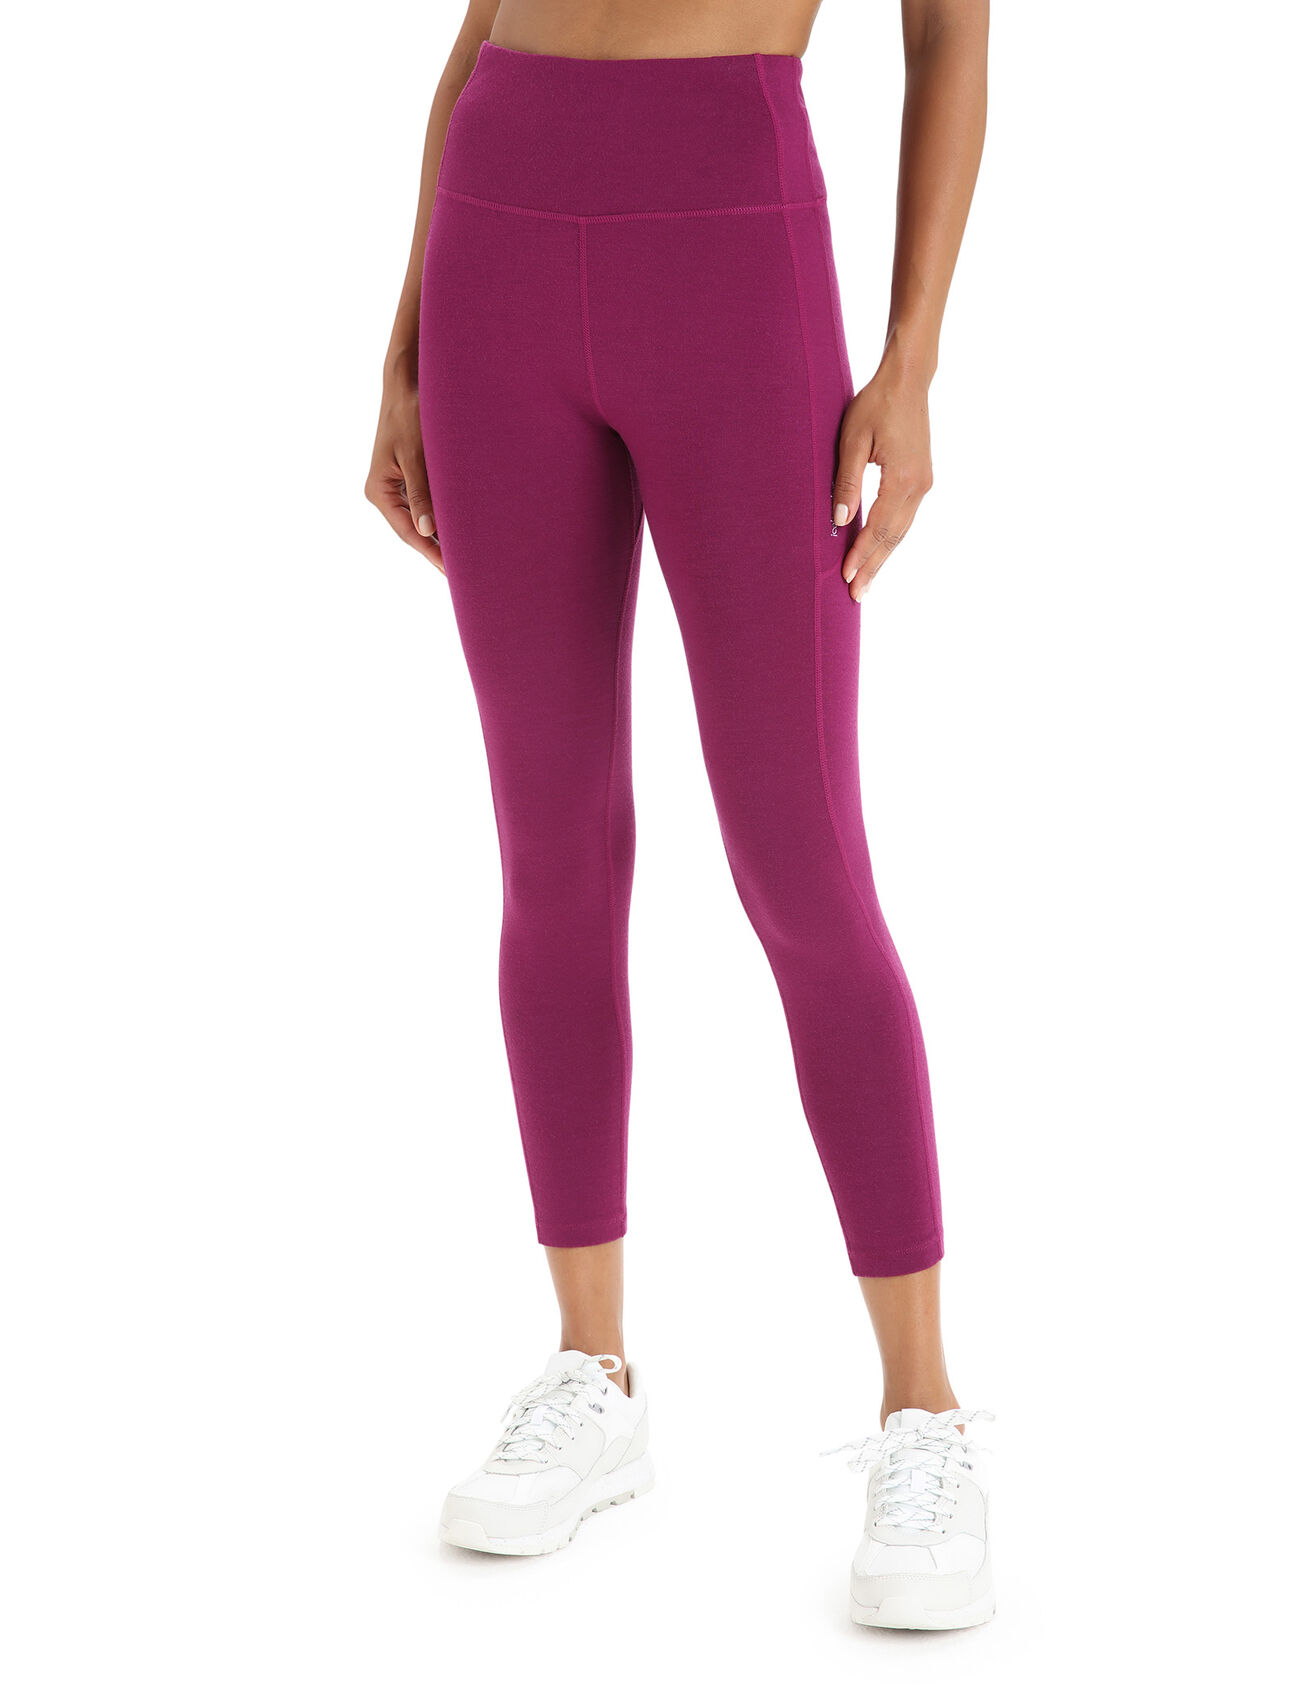 Womens Merino Fastray High Rise Tights Functional, form-fitting bottoms for active performance on or off the trail, the Fastray High Rise Tights feature a stretchy merino wool blend with a high waist for added coverage.